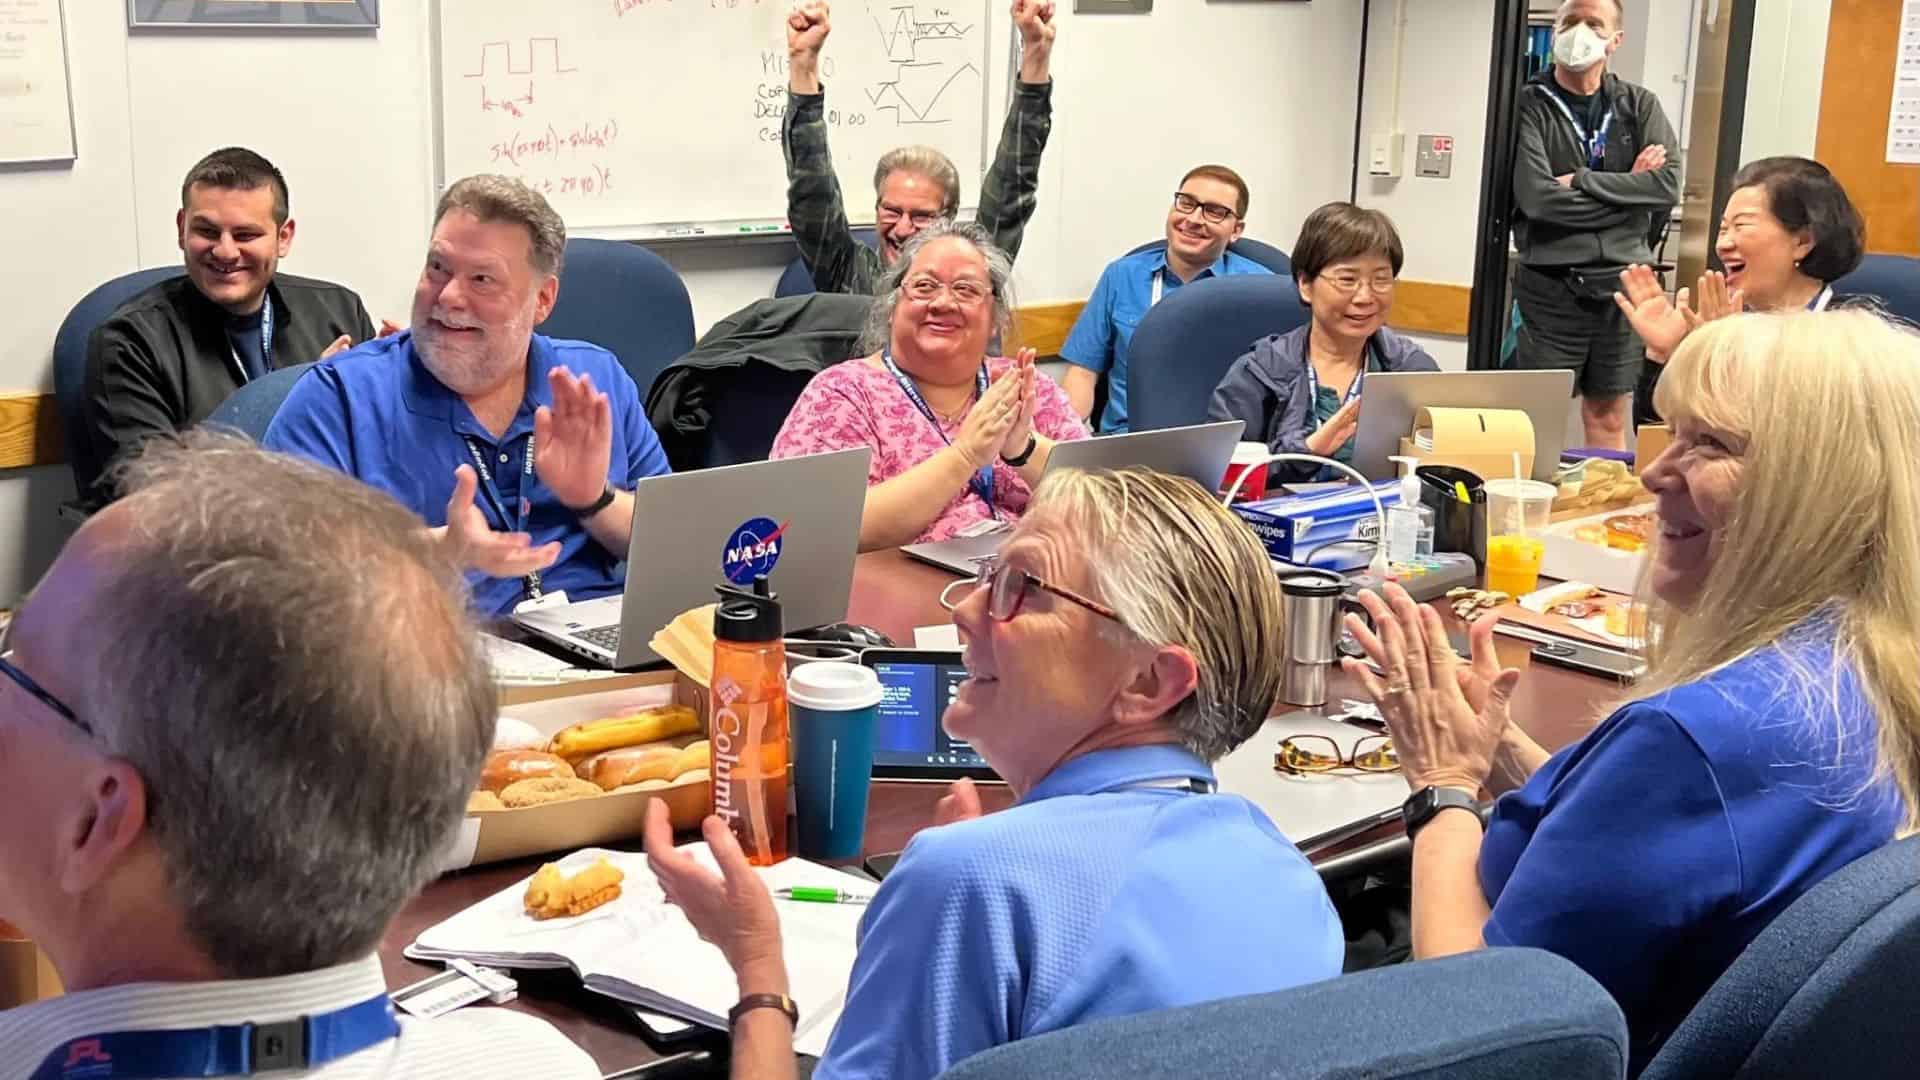 The Voyager 1 team celebrates in a conference room at NASA’s Jet Propulsion Laboratory on April 20, after receiving data about the health and status of Voyager 1 for the first time in five months